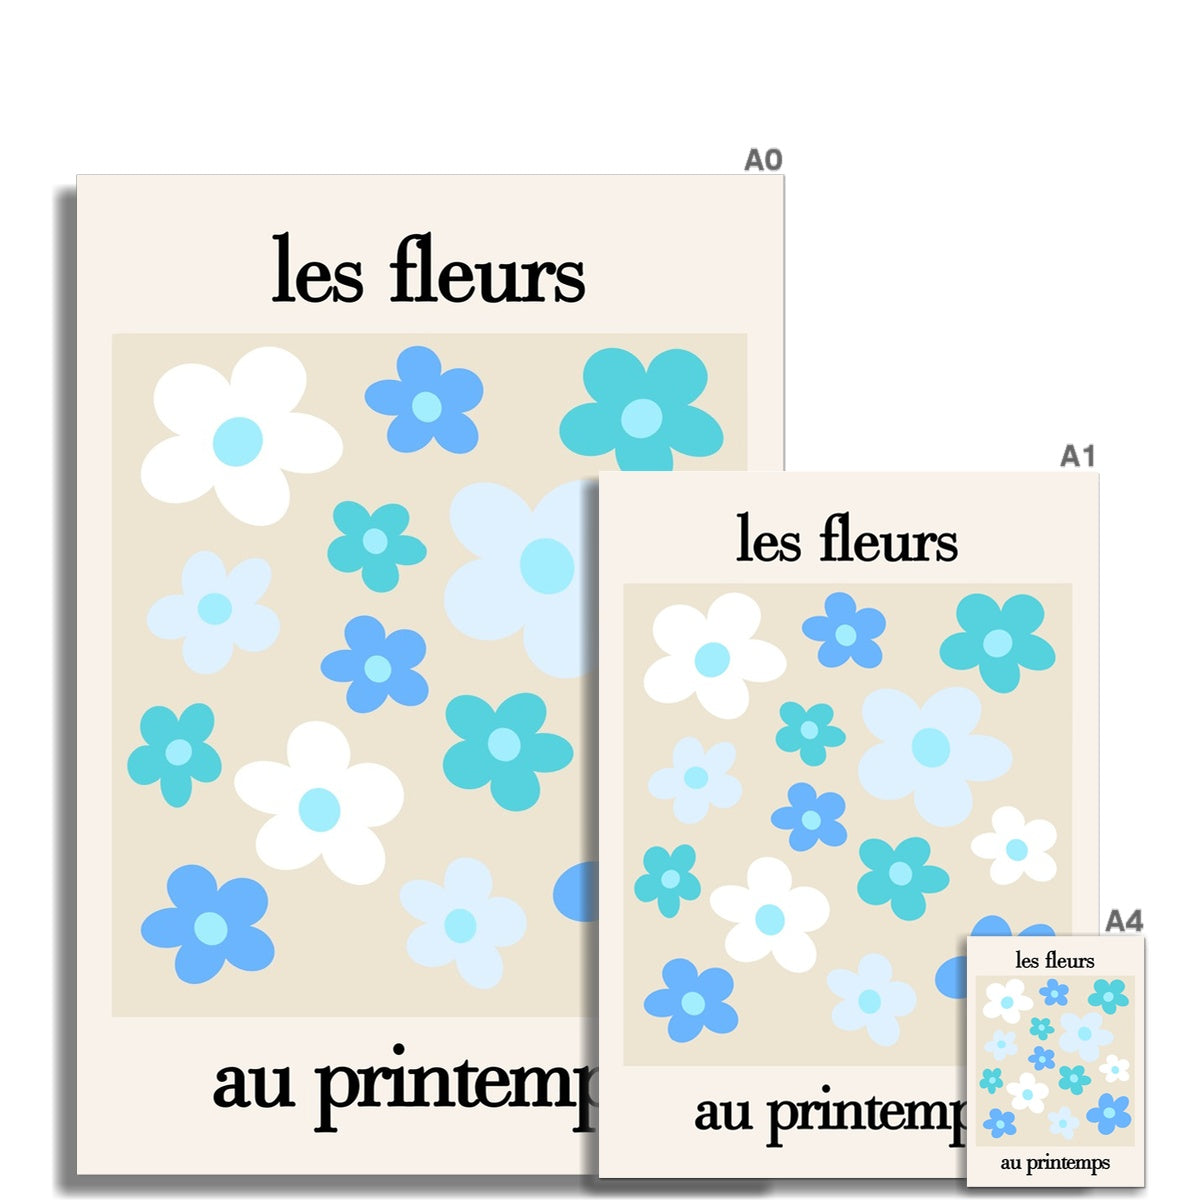 © les muses / Les Fleurs is a collection of danish pastel wall art full of colorful daisy flowers.
Covered in daisies, the Parisian art prints come in an array of dreamy pastels. A retro
flower poster perfect as aesthetic apartment and dorm decor.